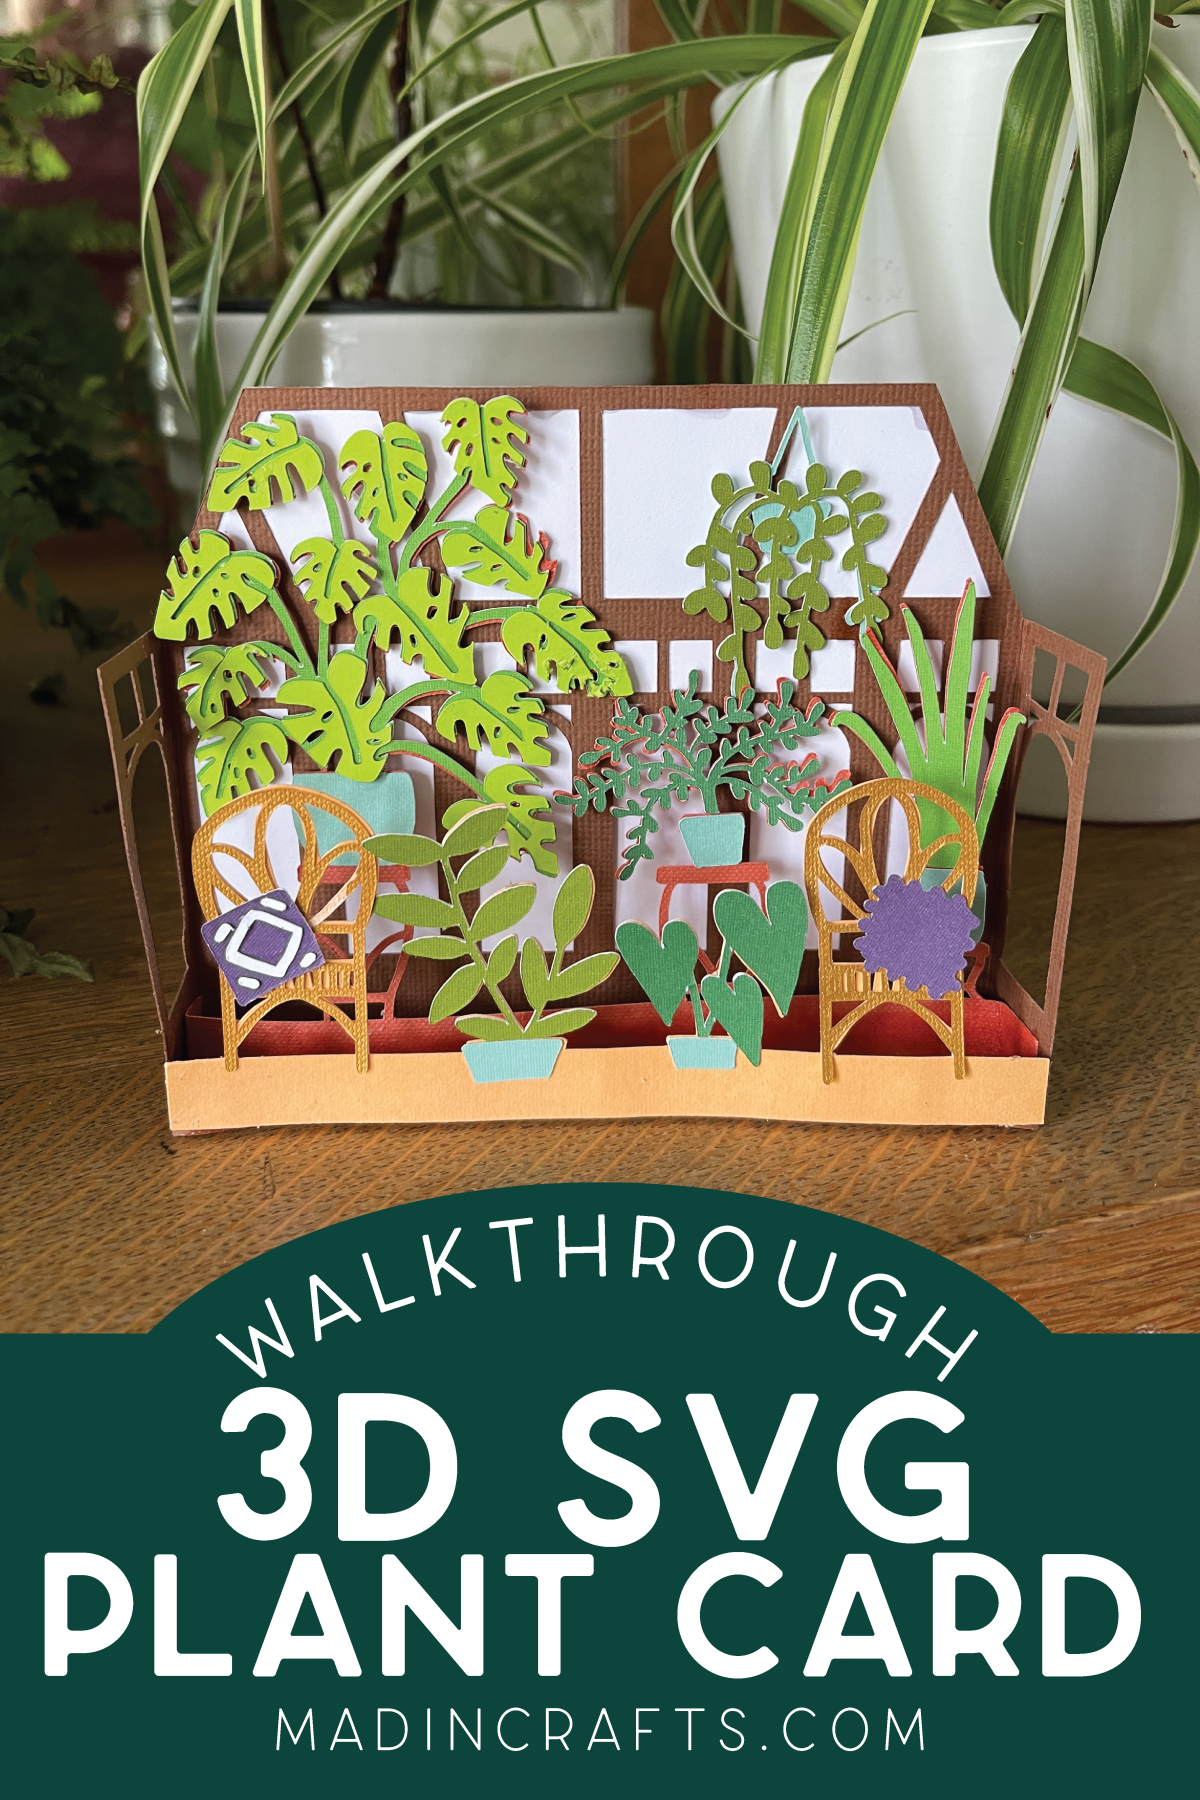 3D Paper Card of houseplants in a sunroom sitting near real plants